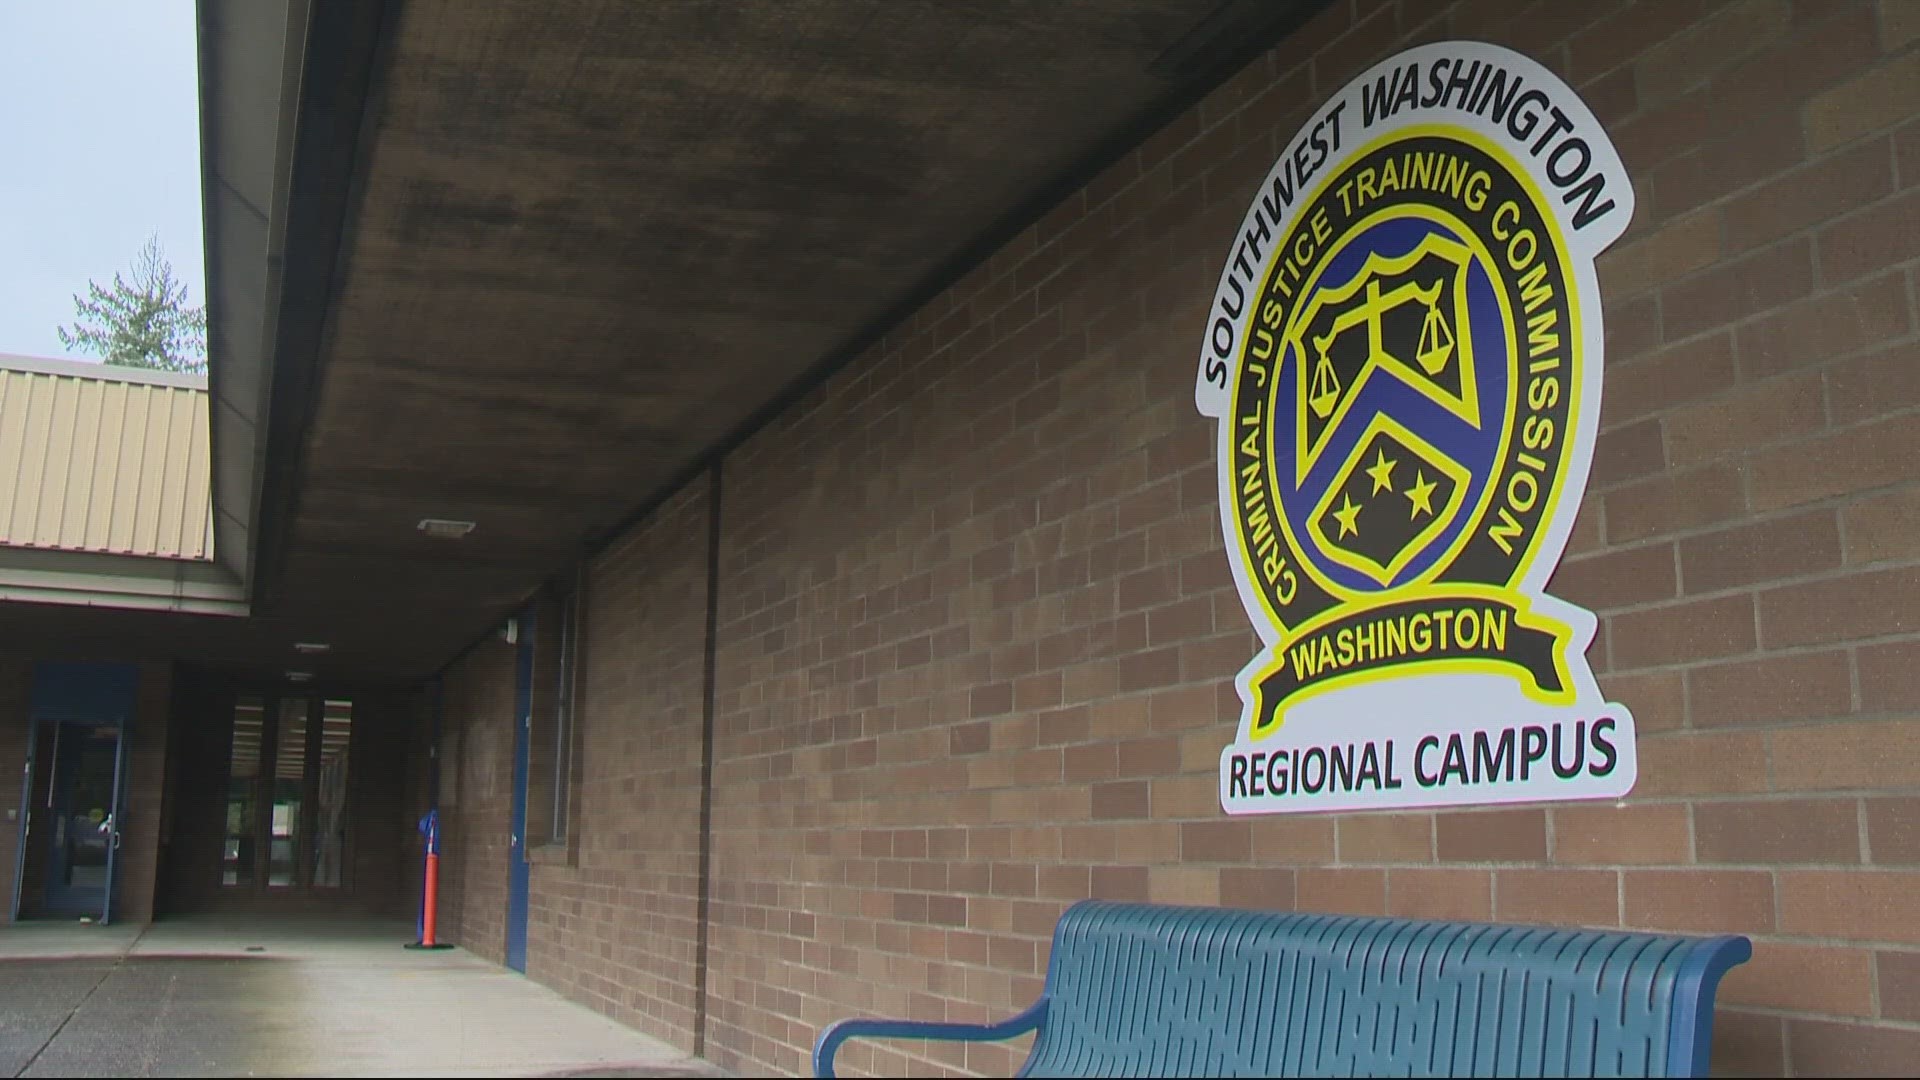 A new law enforcement training center opens in Vancouver to make the career more accessible for those close to home and fill vacancies.